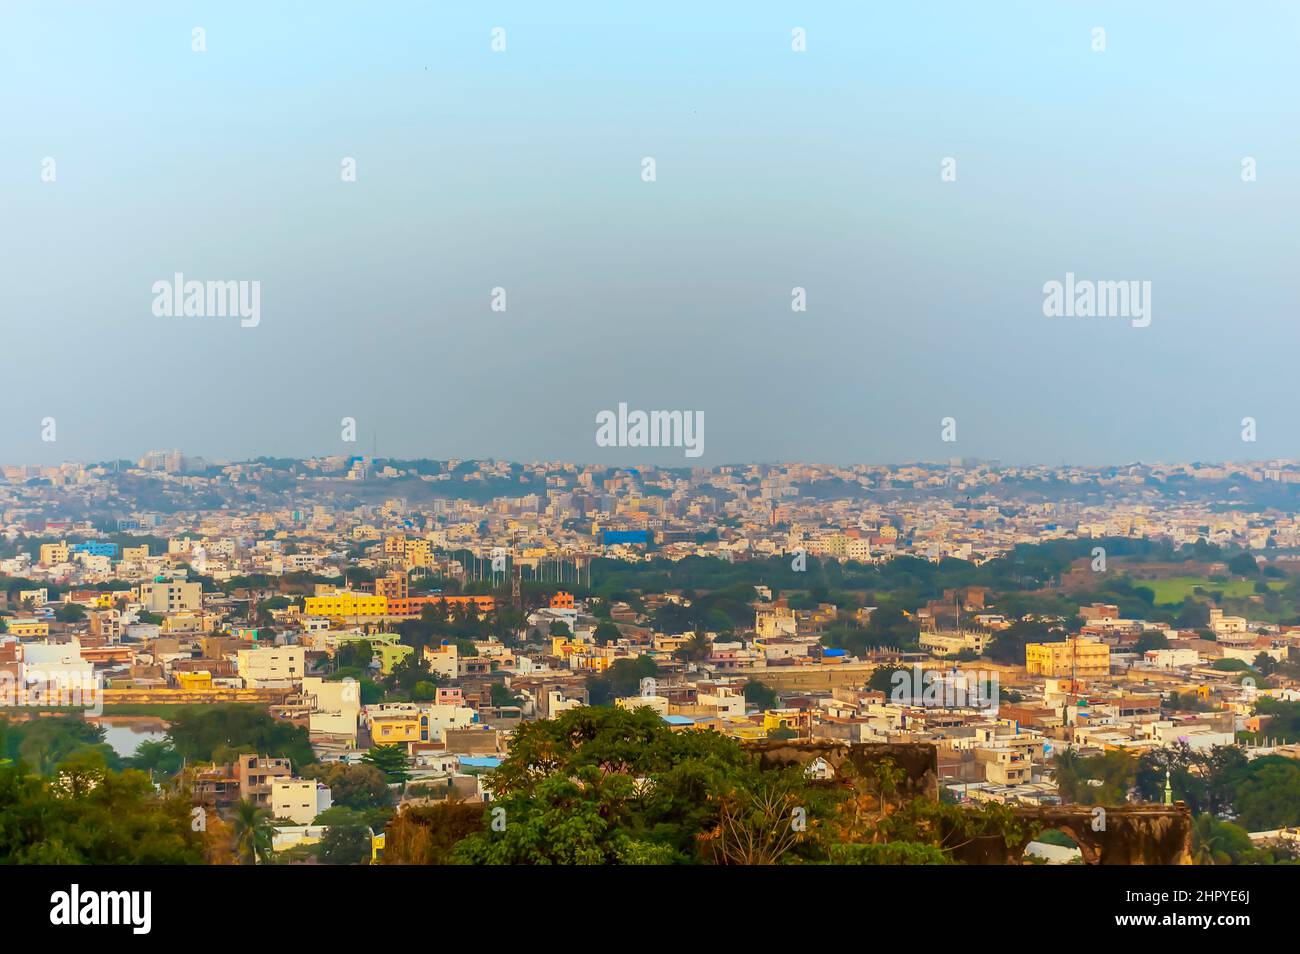 A view of the Hyderabad city, Telangana, India, from atop the Golconda fort. A thin layer of smog can be seen pervading the city's skyline. Stock Photo